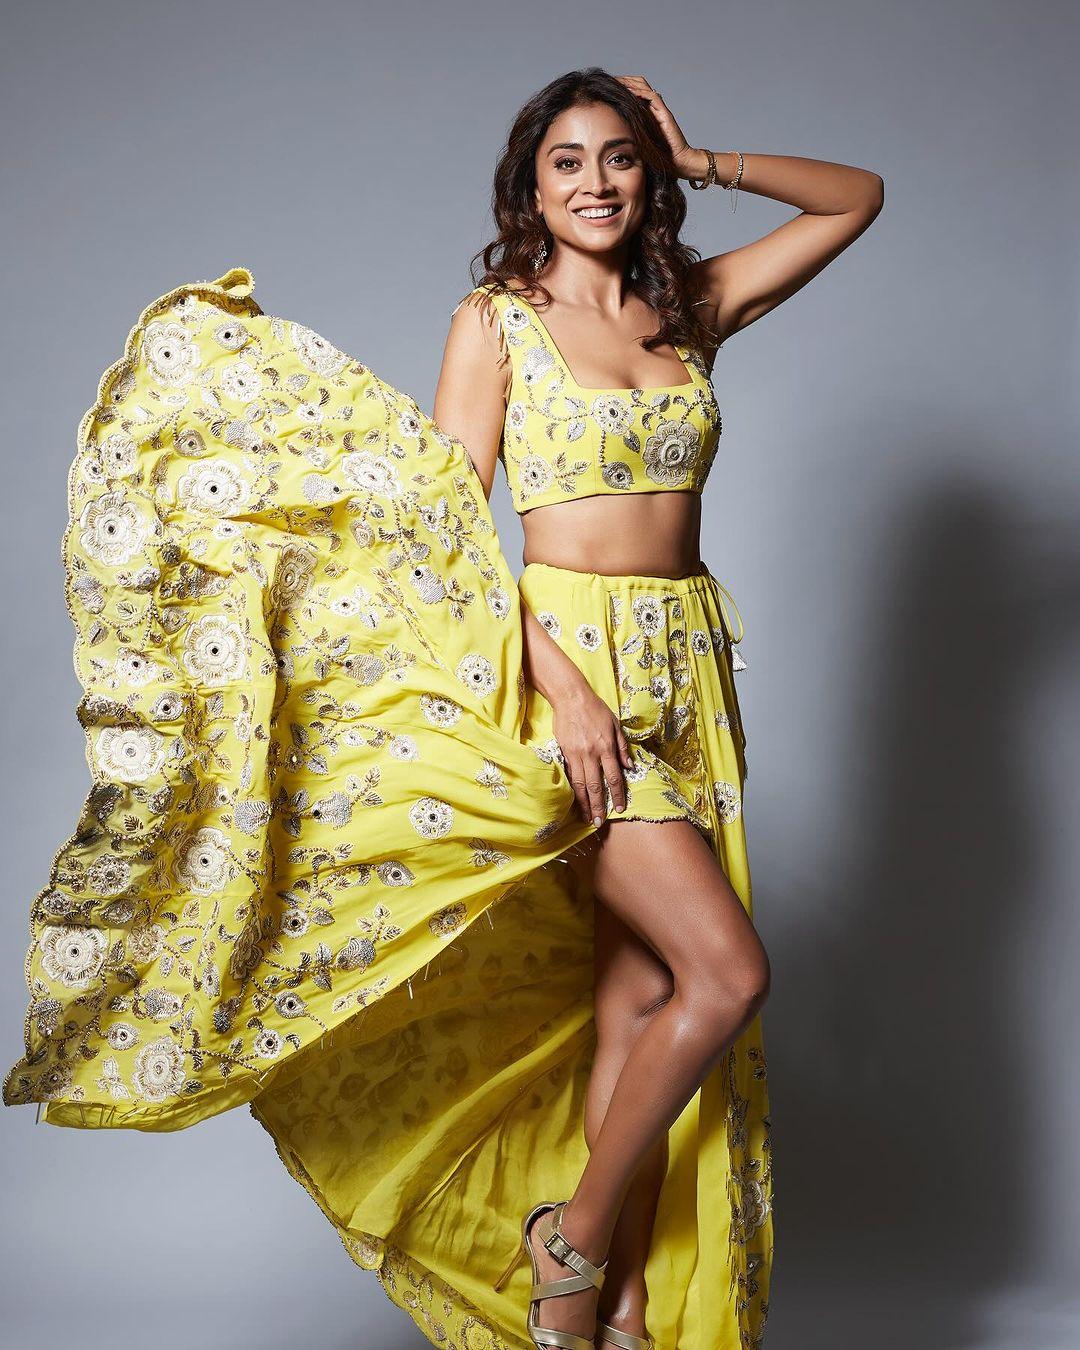 Shriya Saran gets playful in this yellow Payal Singhal lehenga. Fuss-free and simple, this outfit adds a dose of childish innocence to Shriya's look